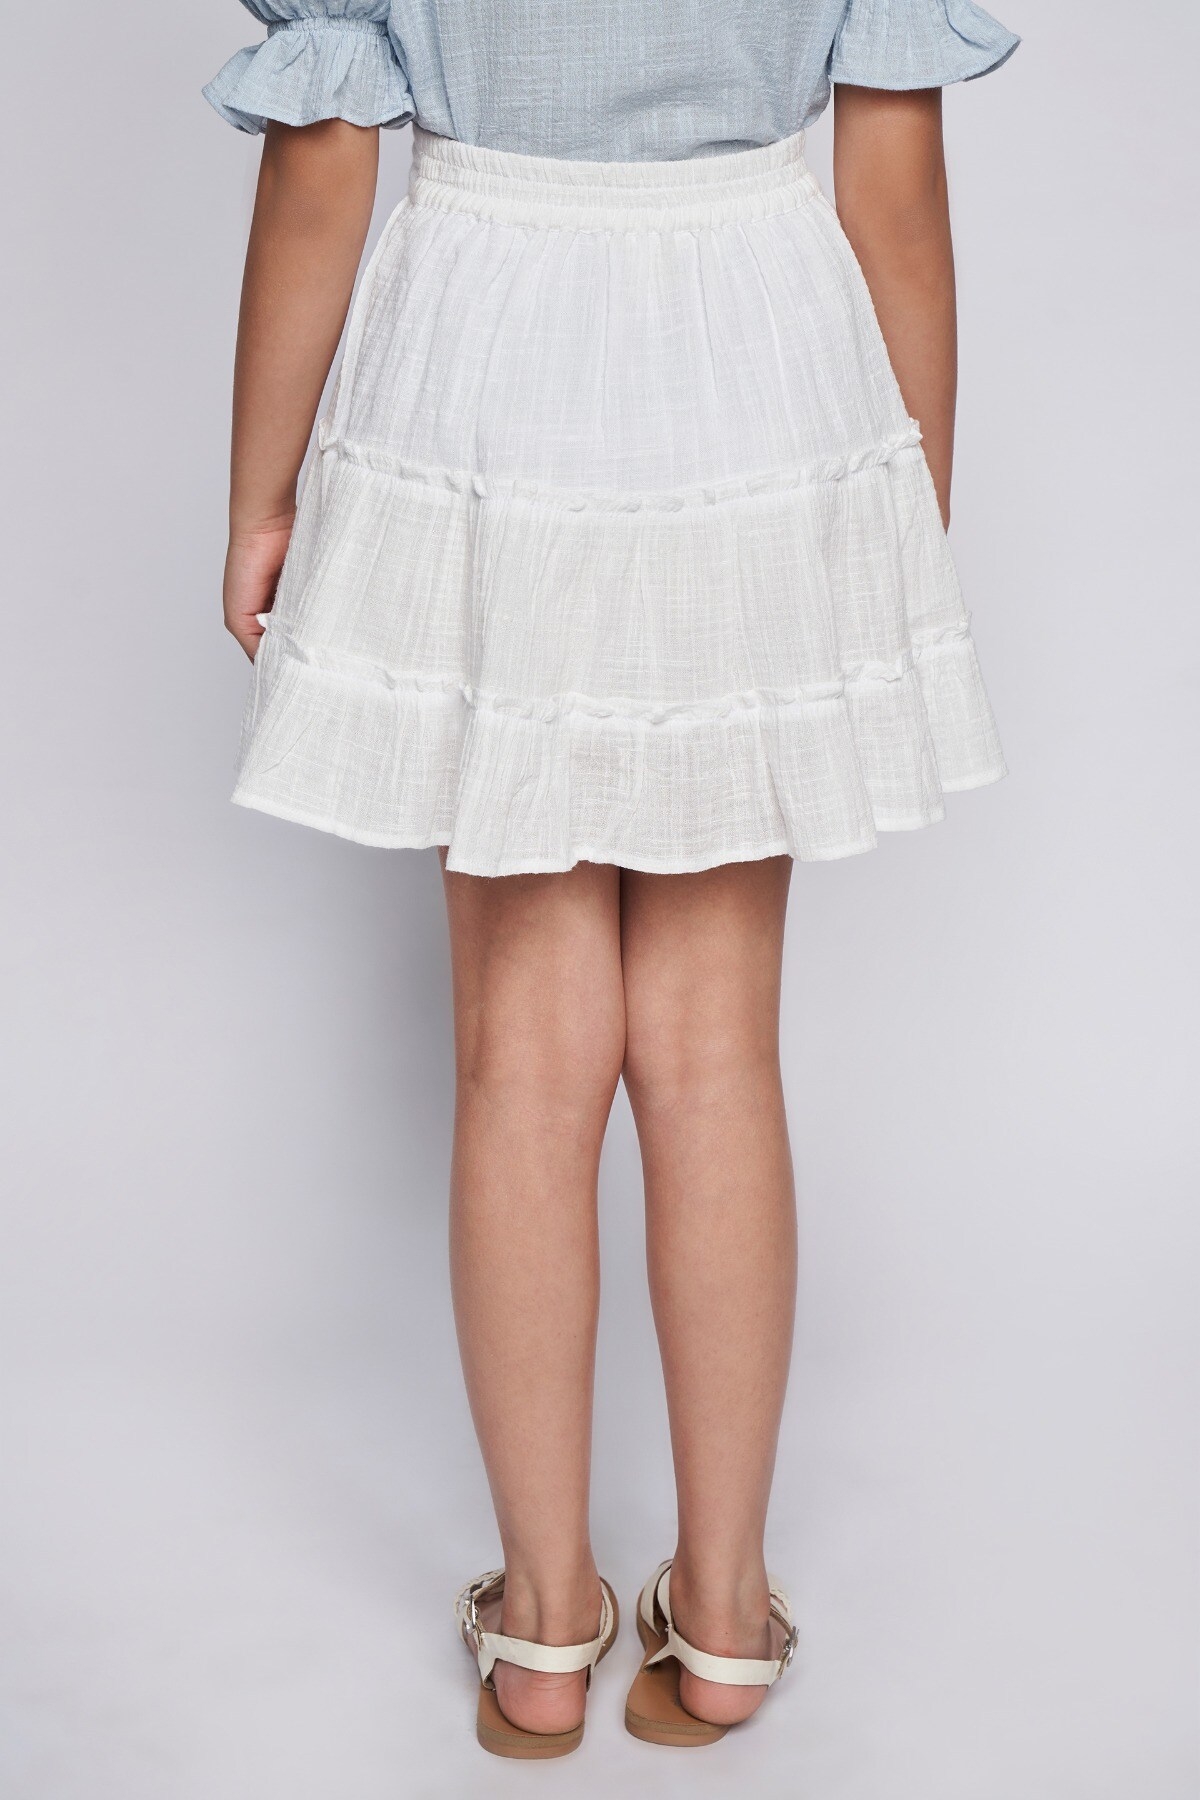 AND | AND White Skirt 3